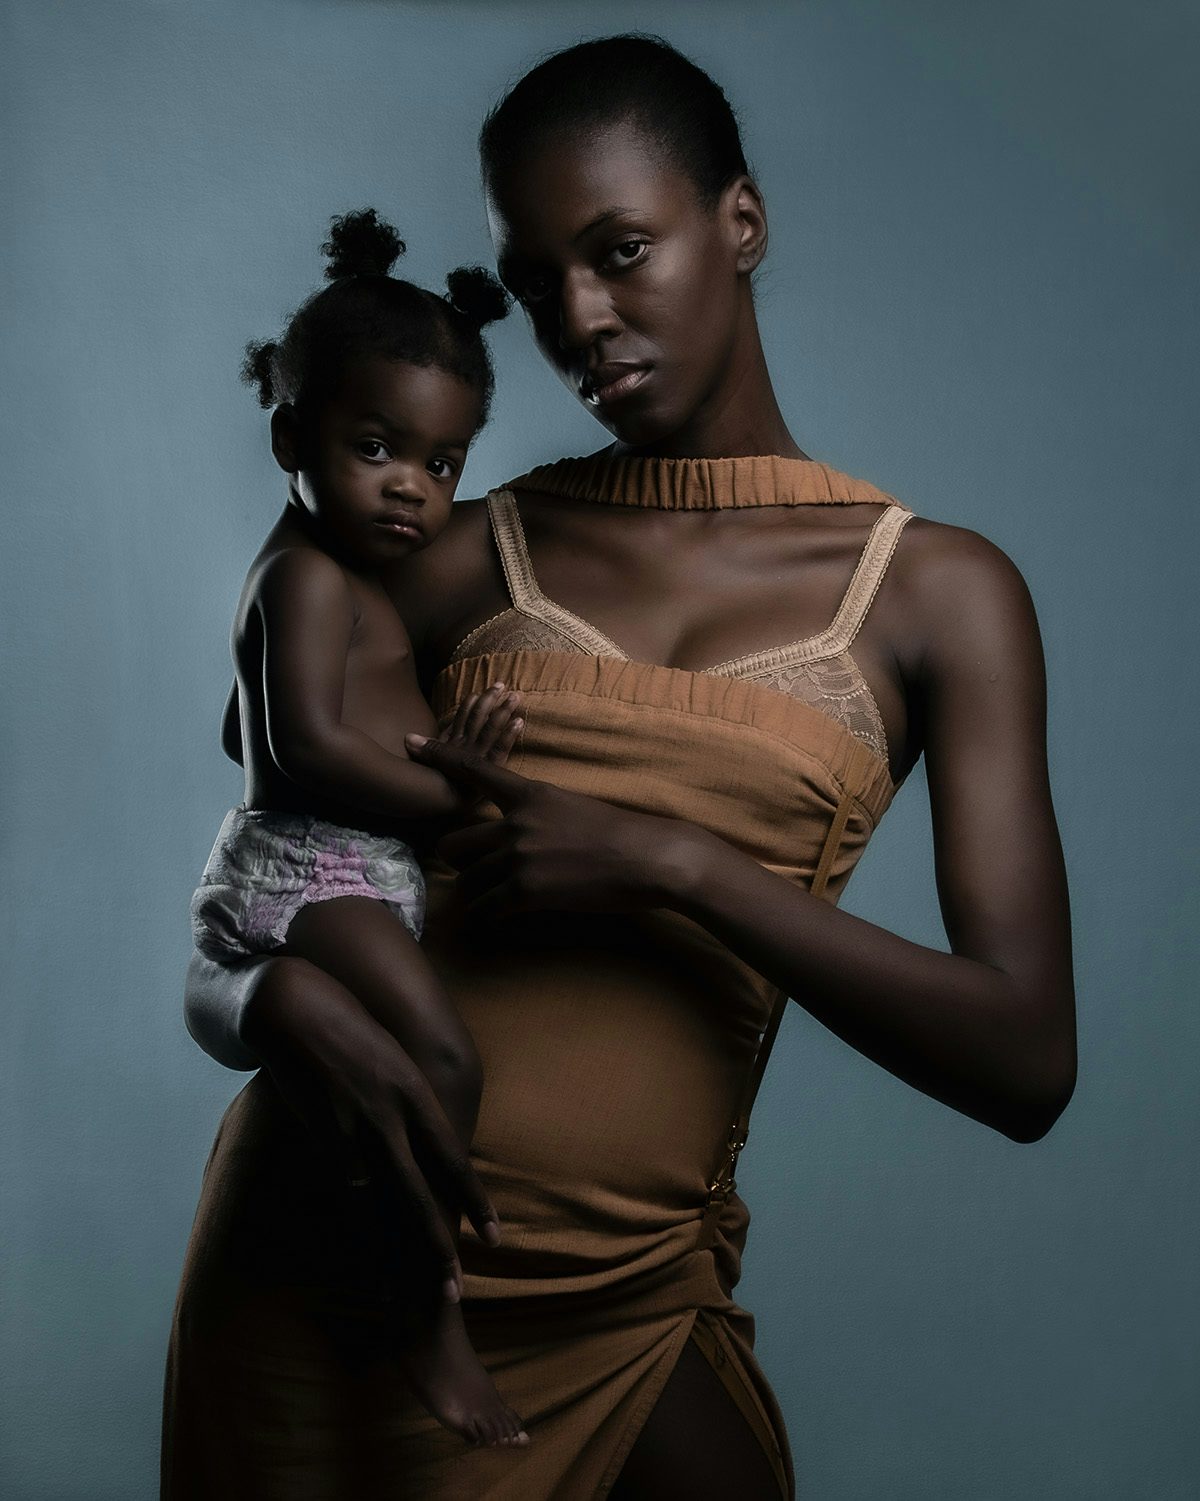 Image by Jet Swan shows a mother holding her baby